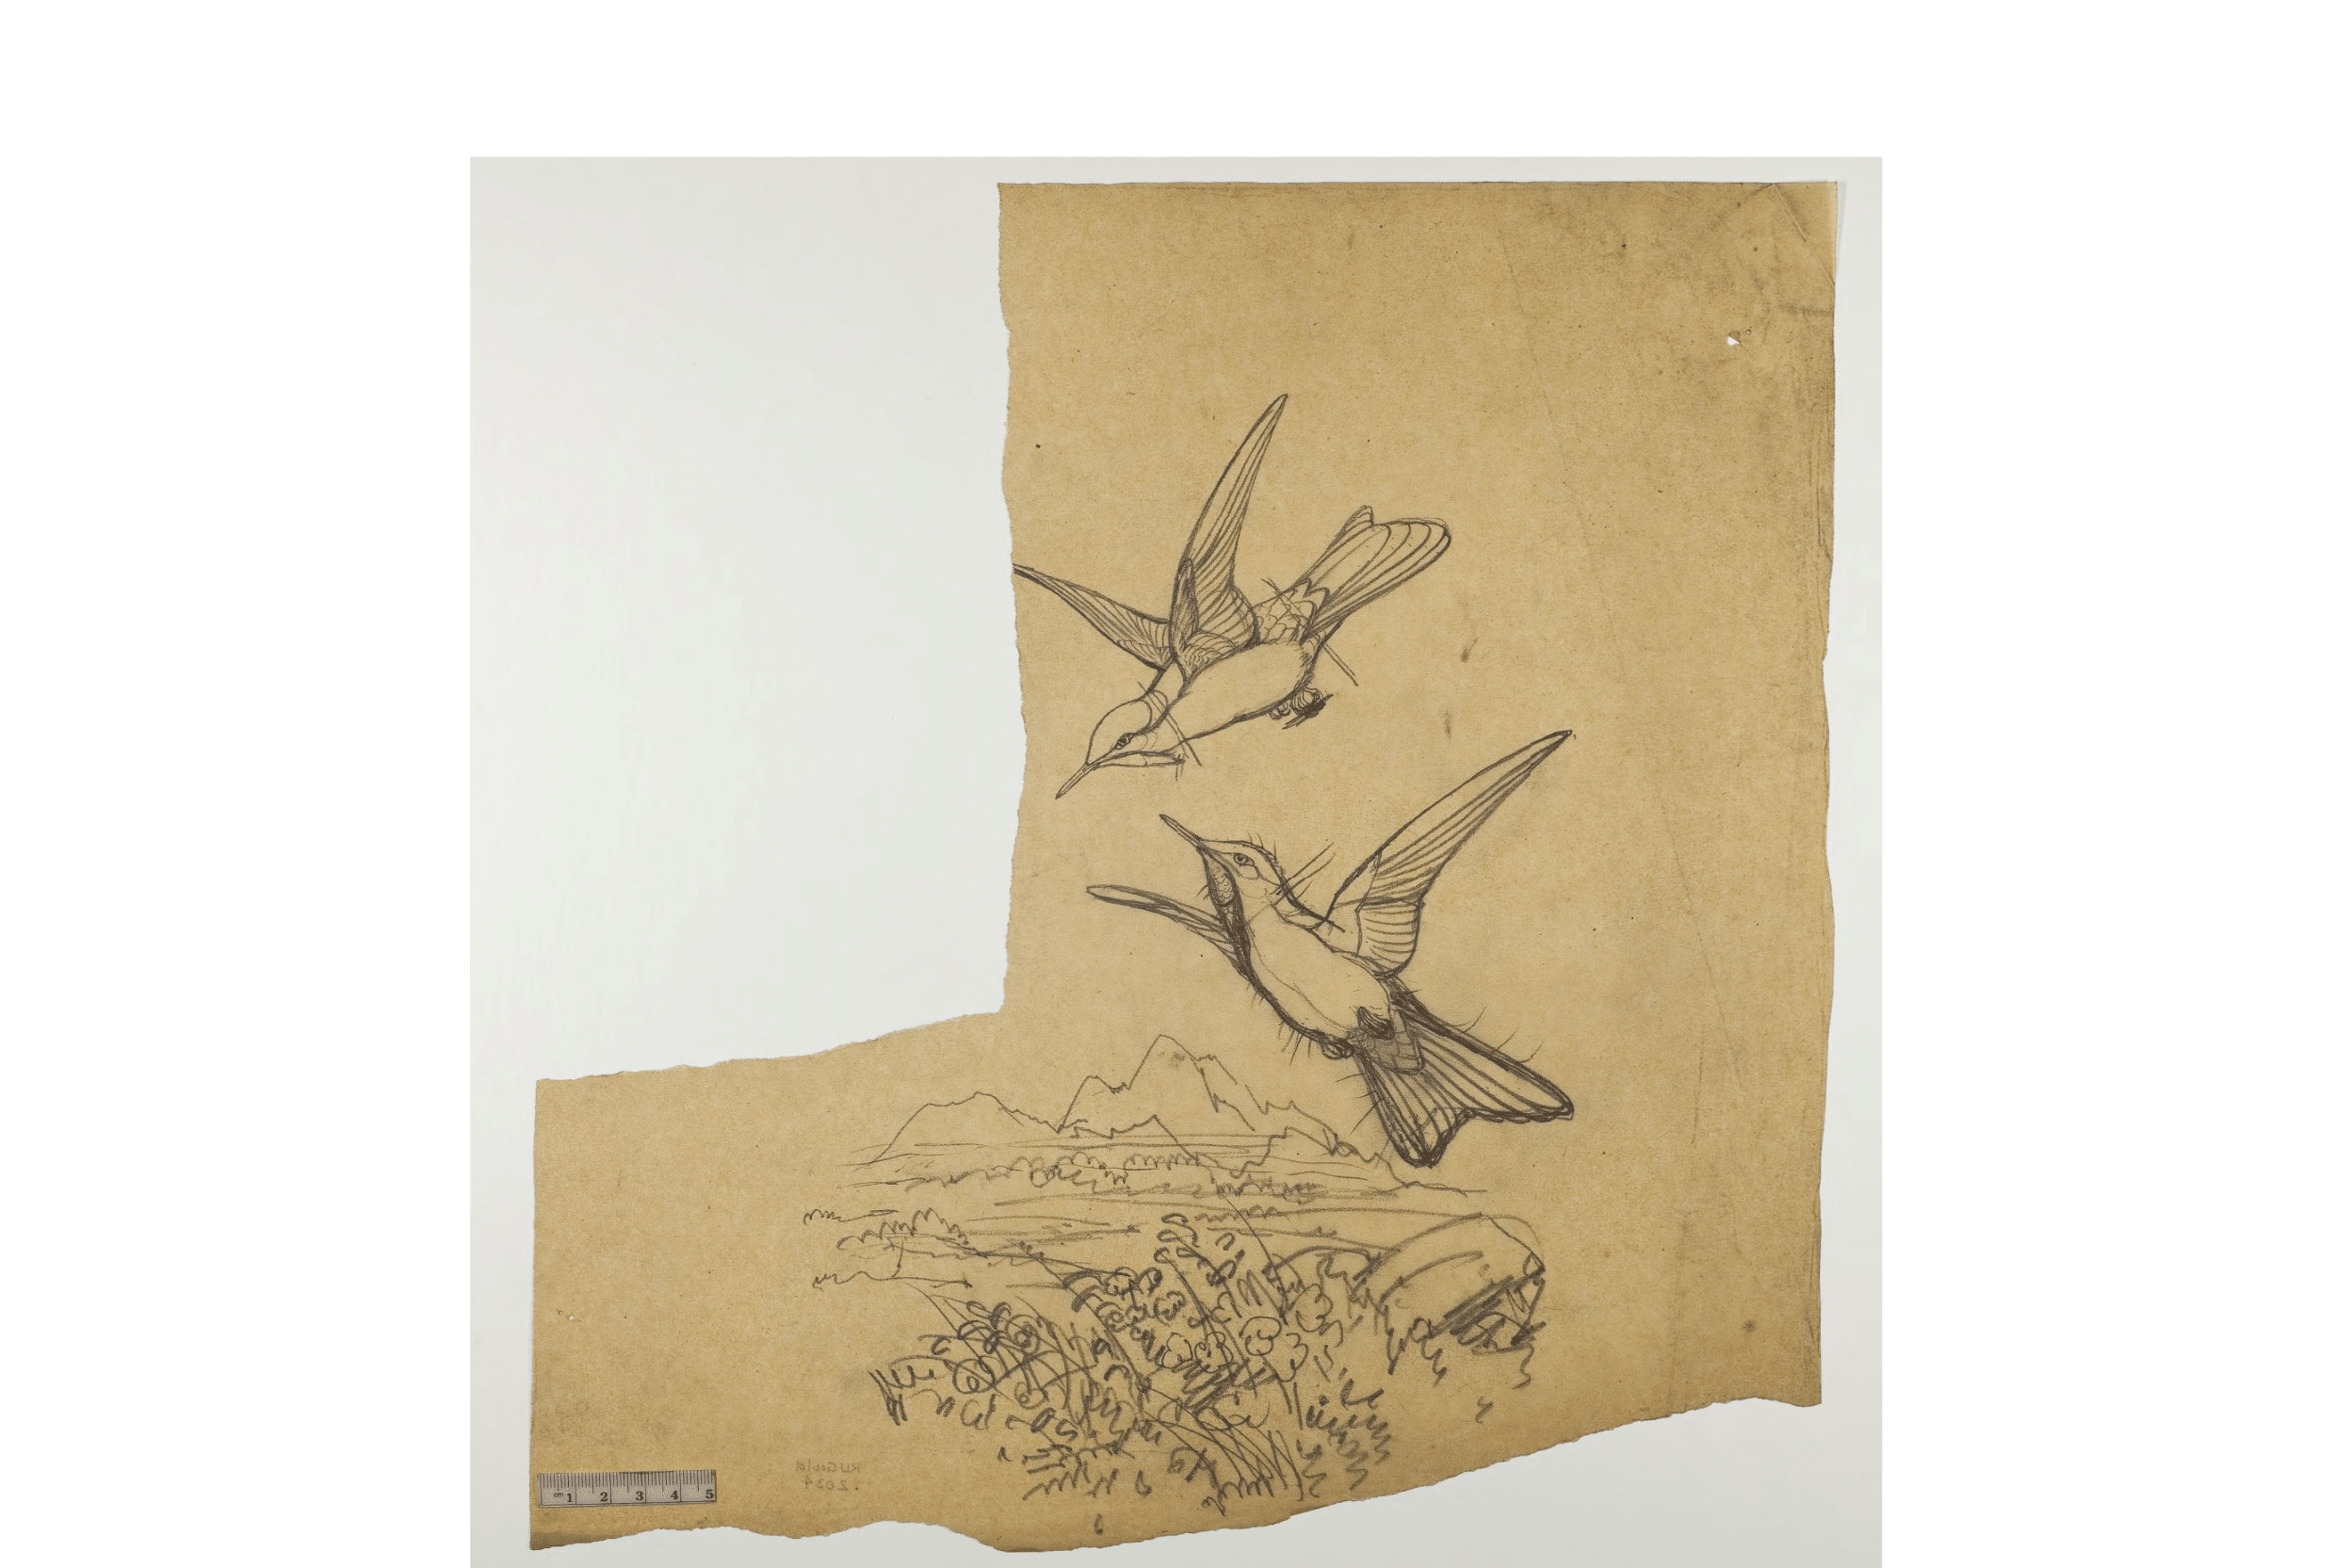 Preliminary sketches were drawn before the imagery was transferred to the lithography stone